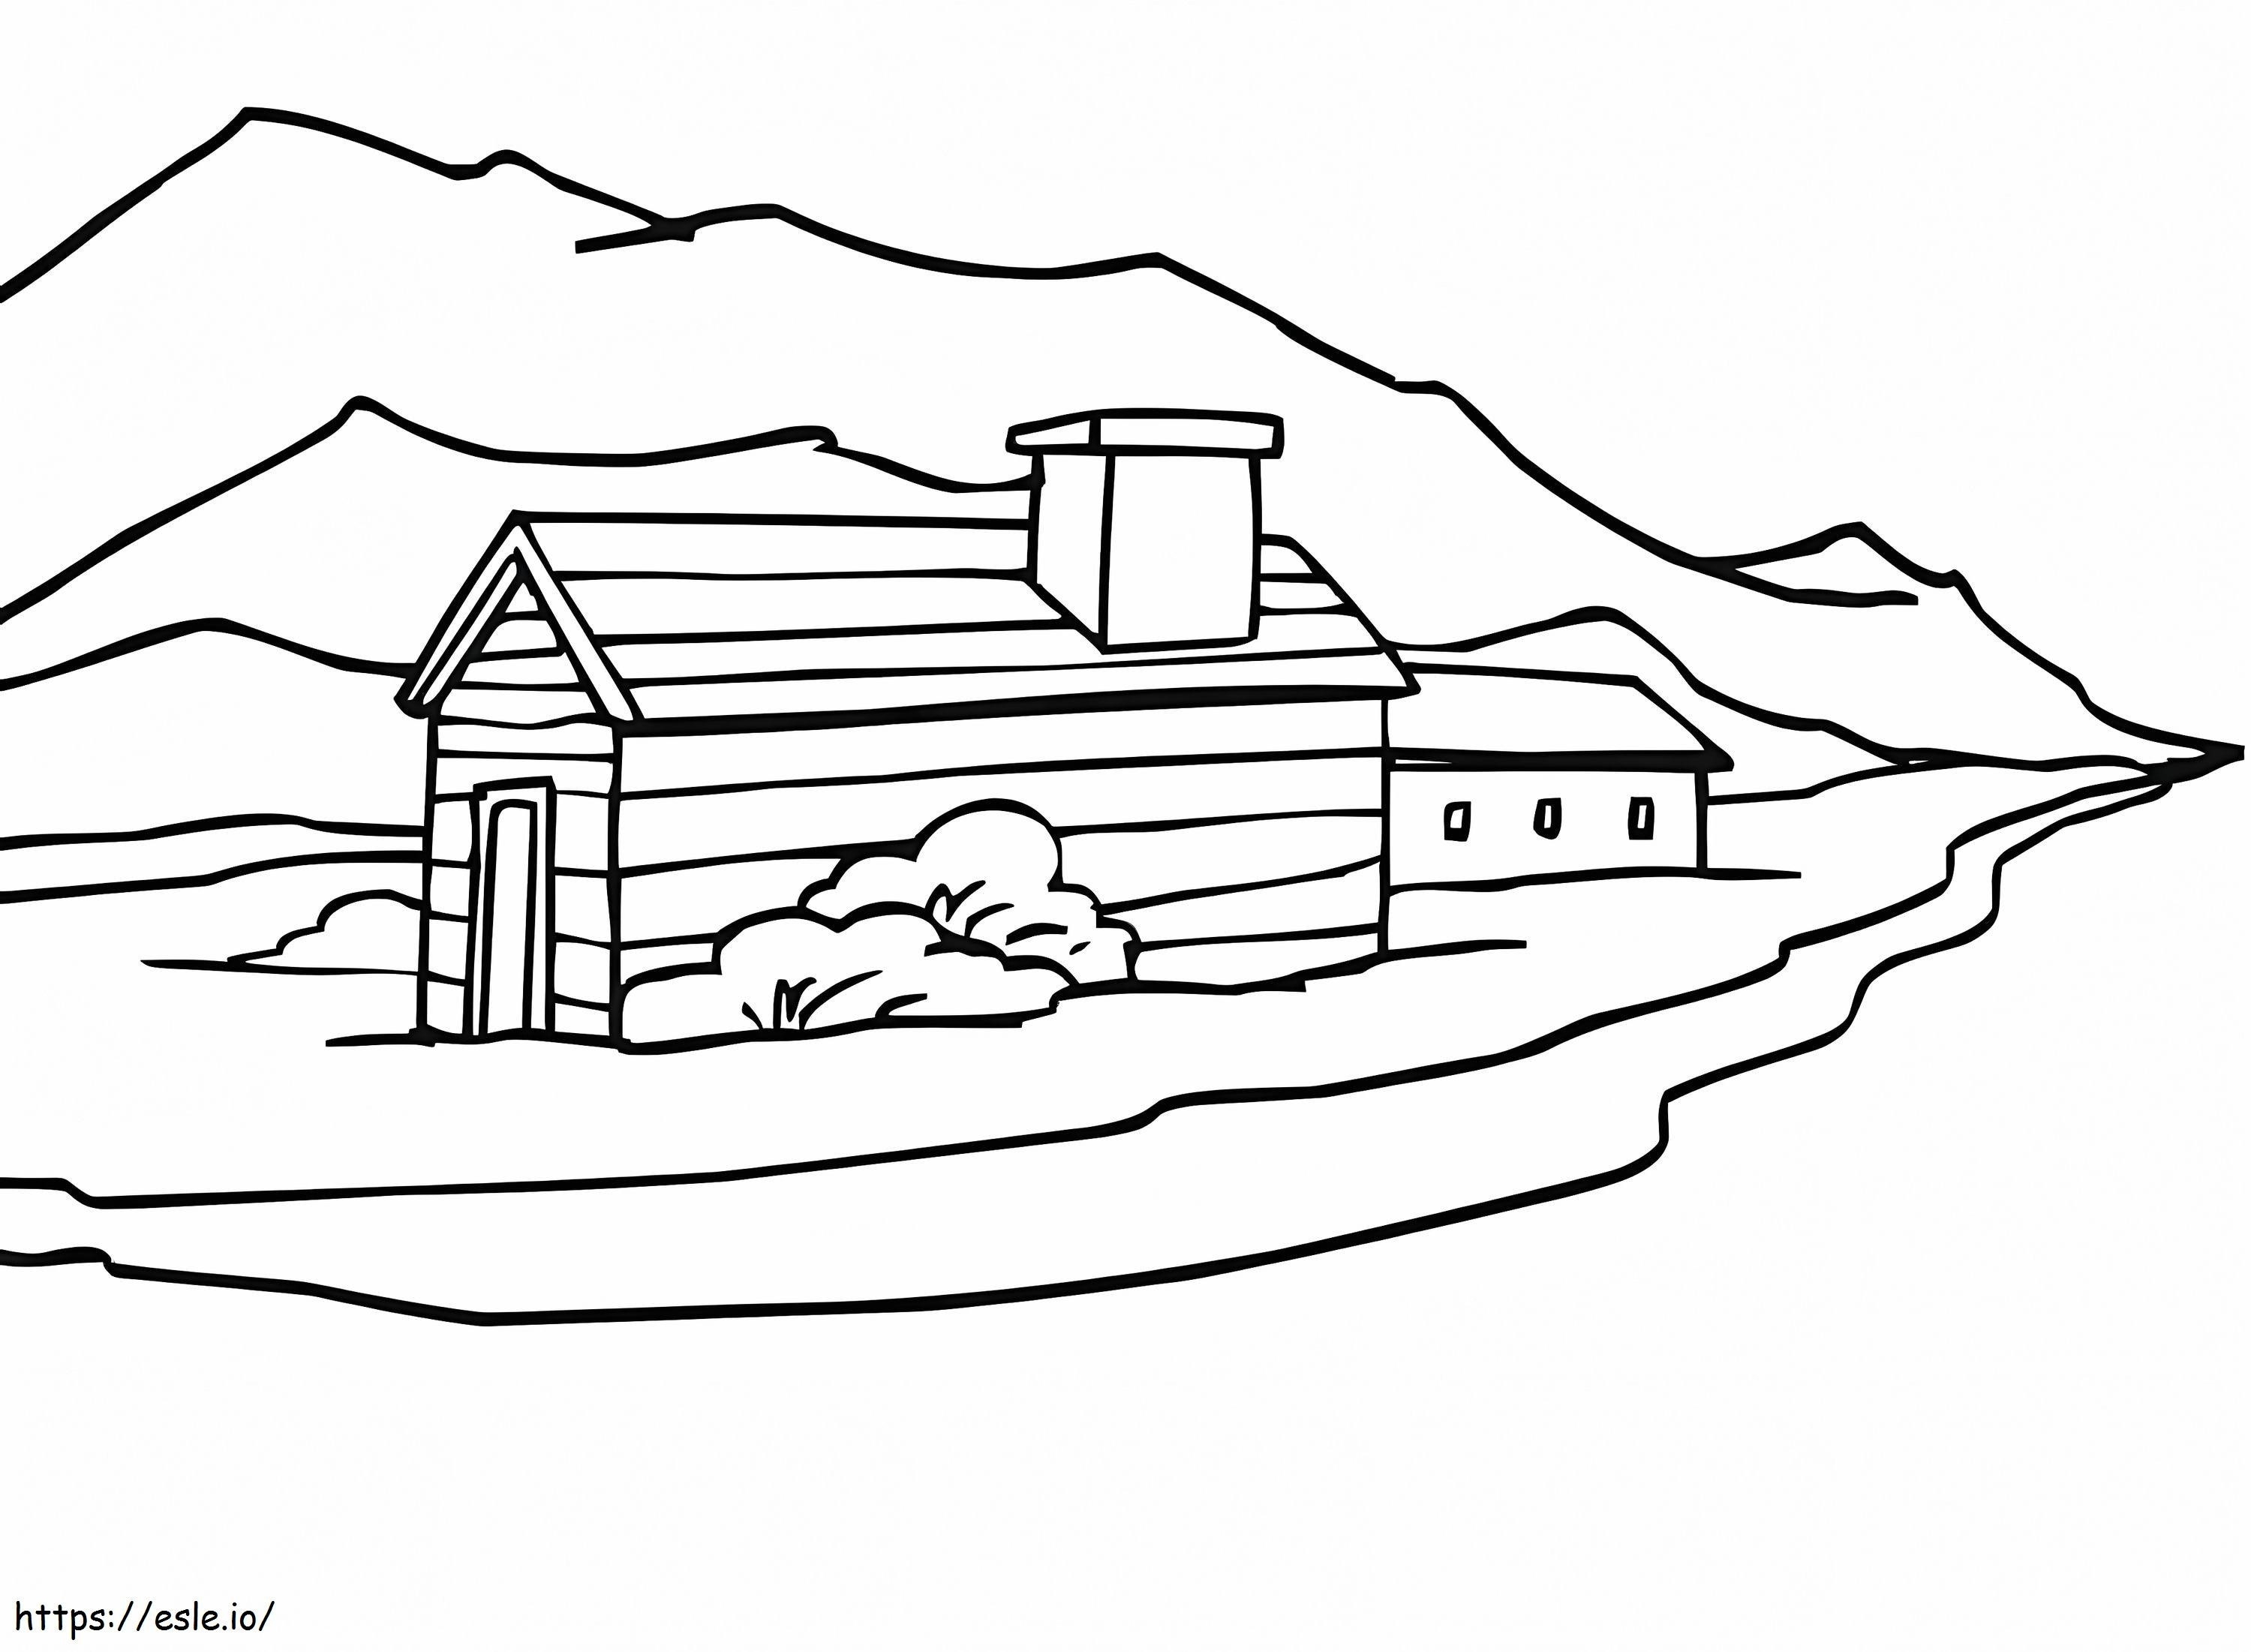 Norway Rural Landscape coloring page